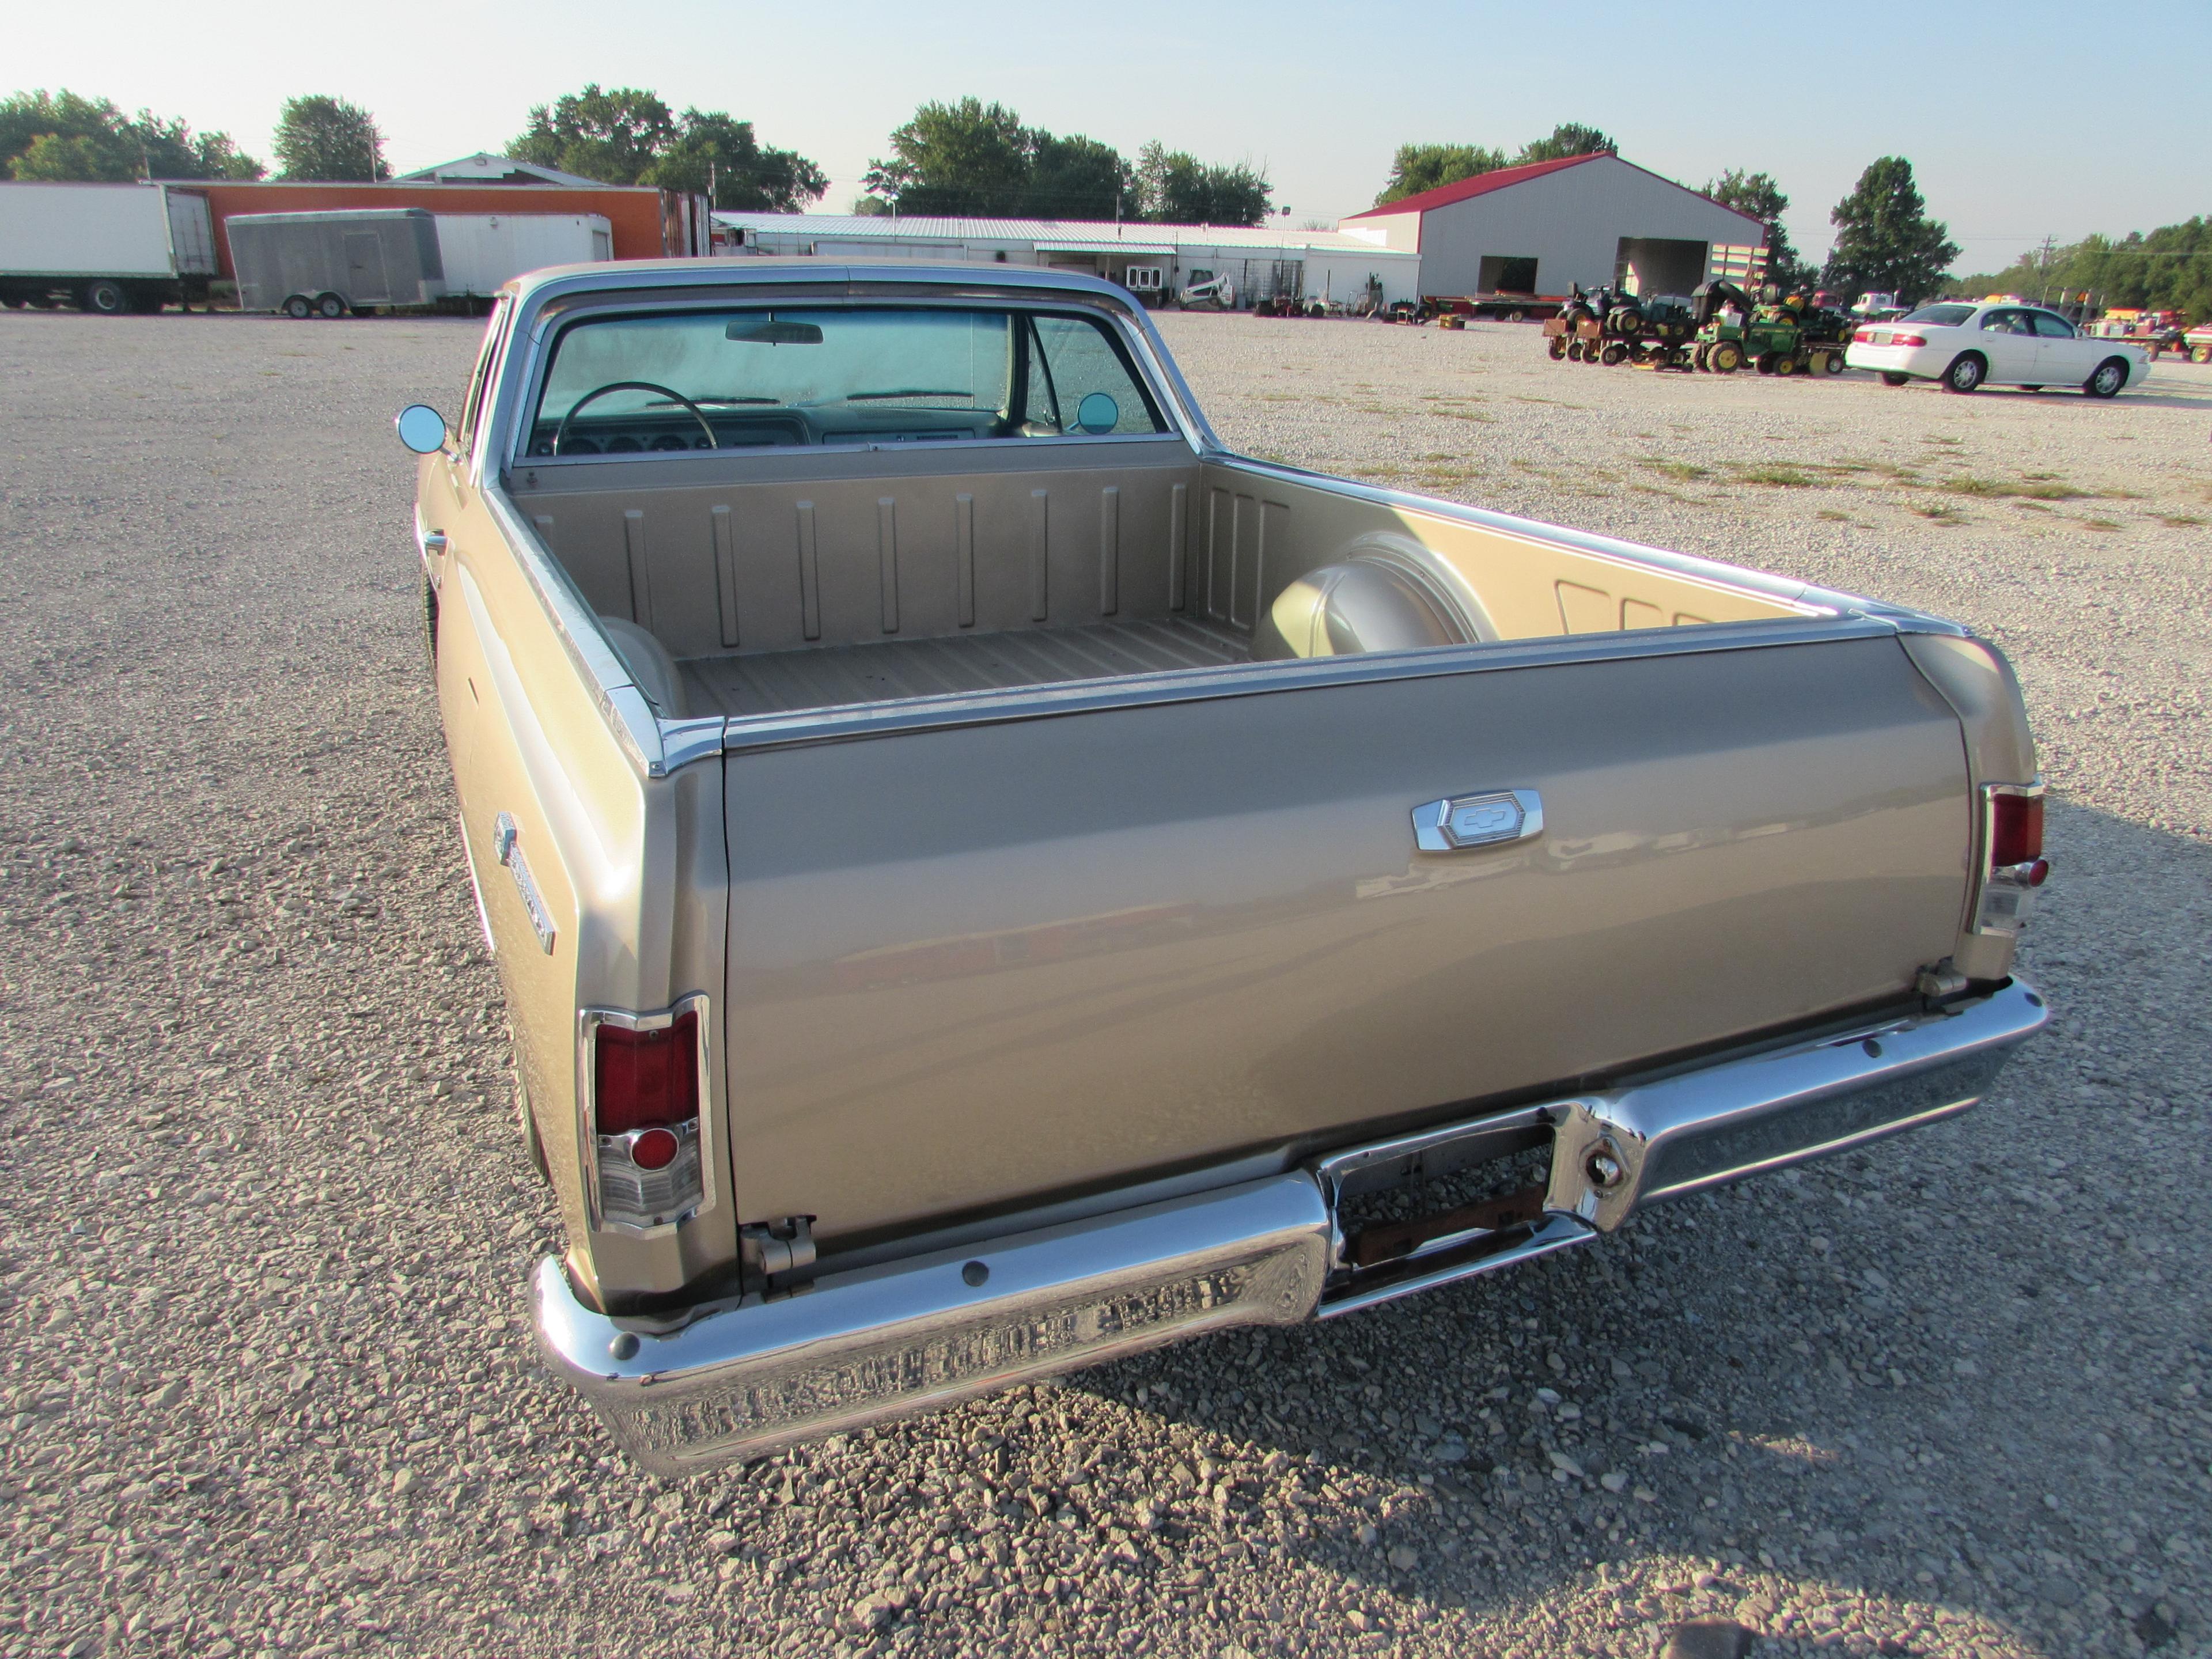 1964 Chevy Elcamino Miles Showing: 81,241